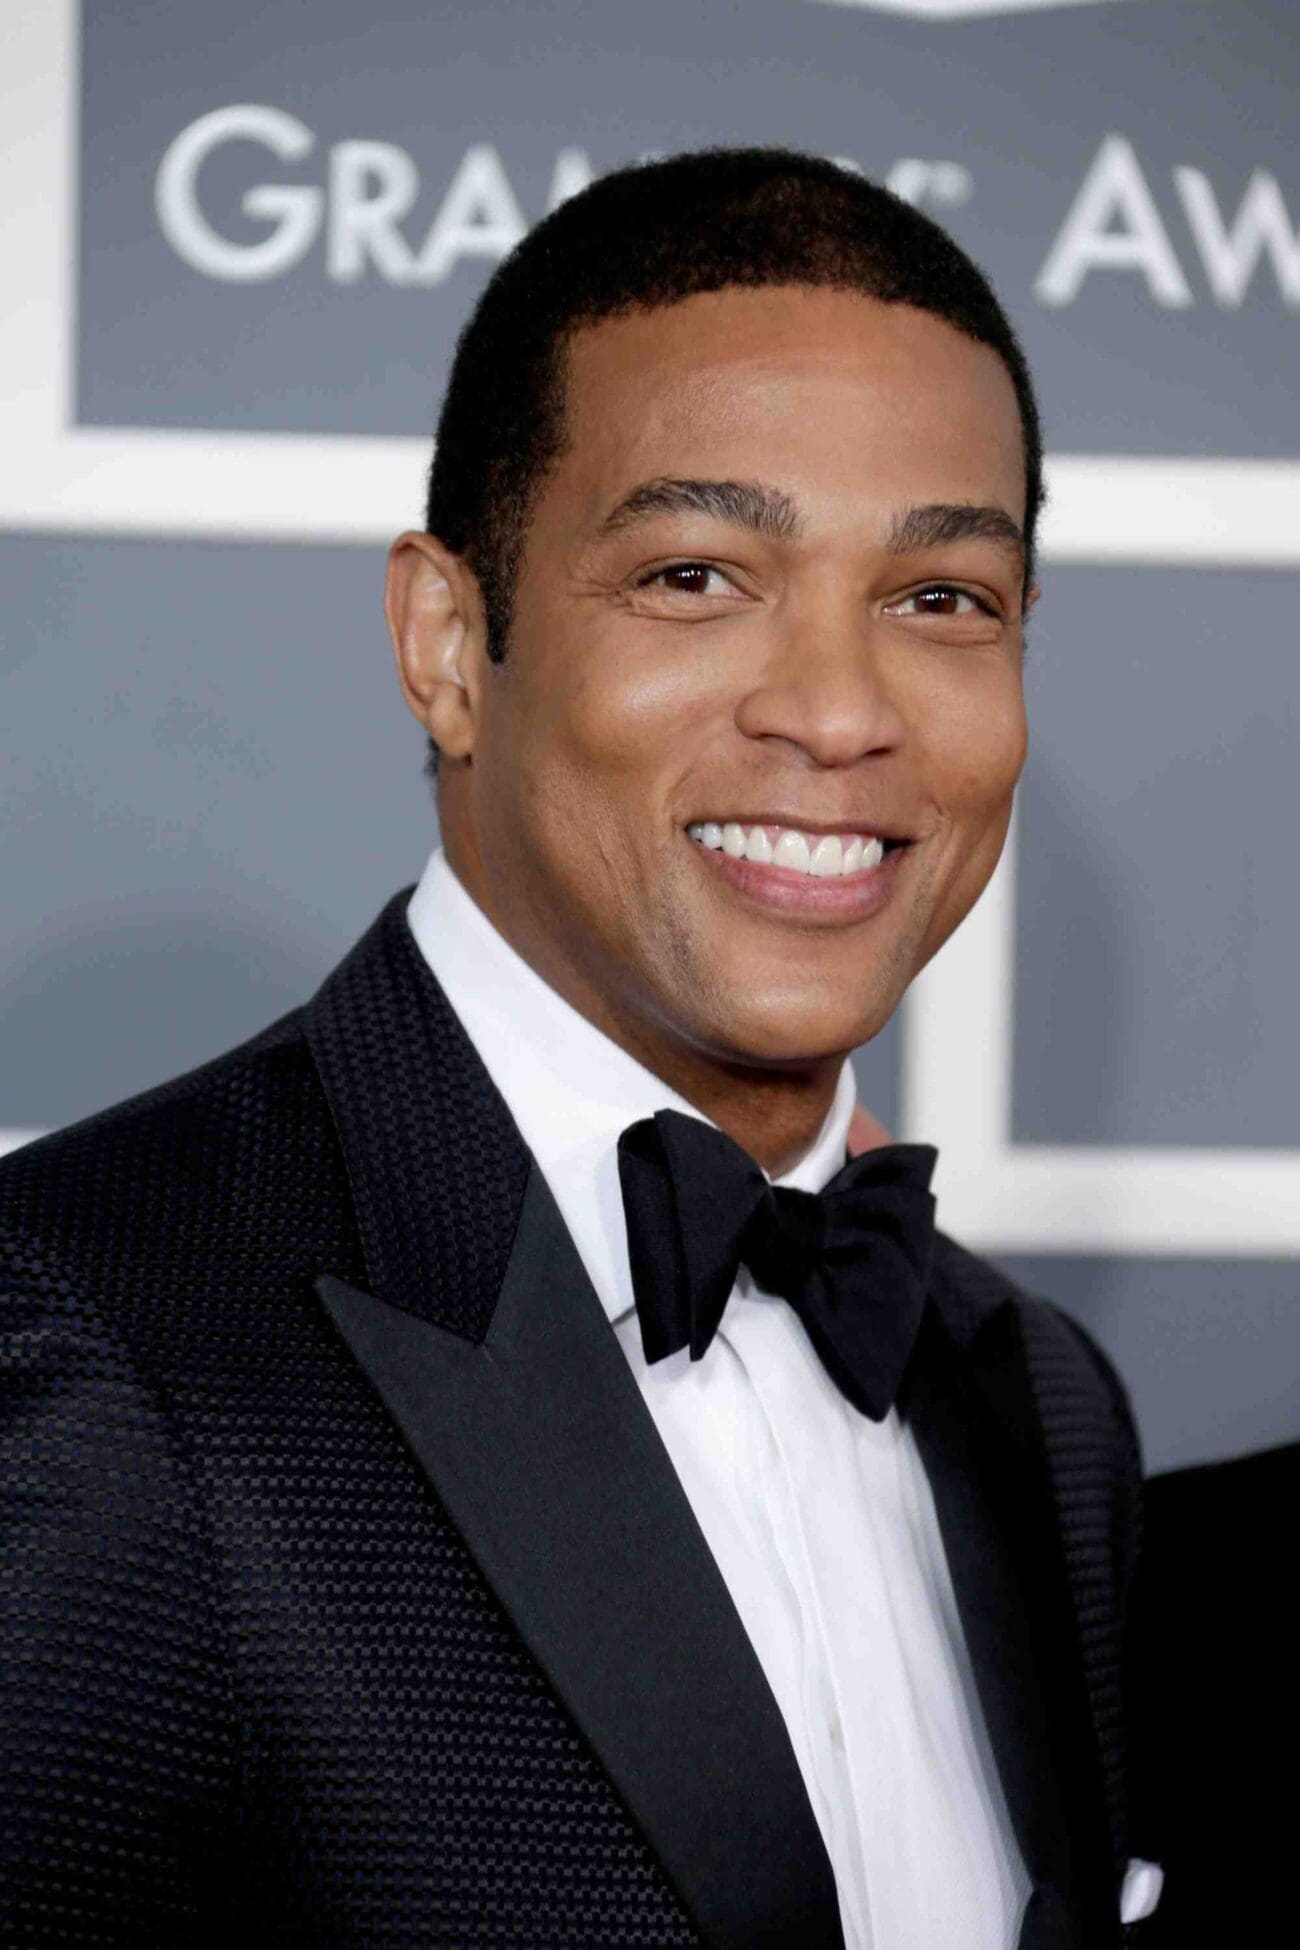 Discover how Don Lemon turned sour splits into sweet success! Unveil the juicy details on Don Lemon's net worth post-divorce: a delicious mix of resilience, reinvention, and revitalized riches.